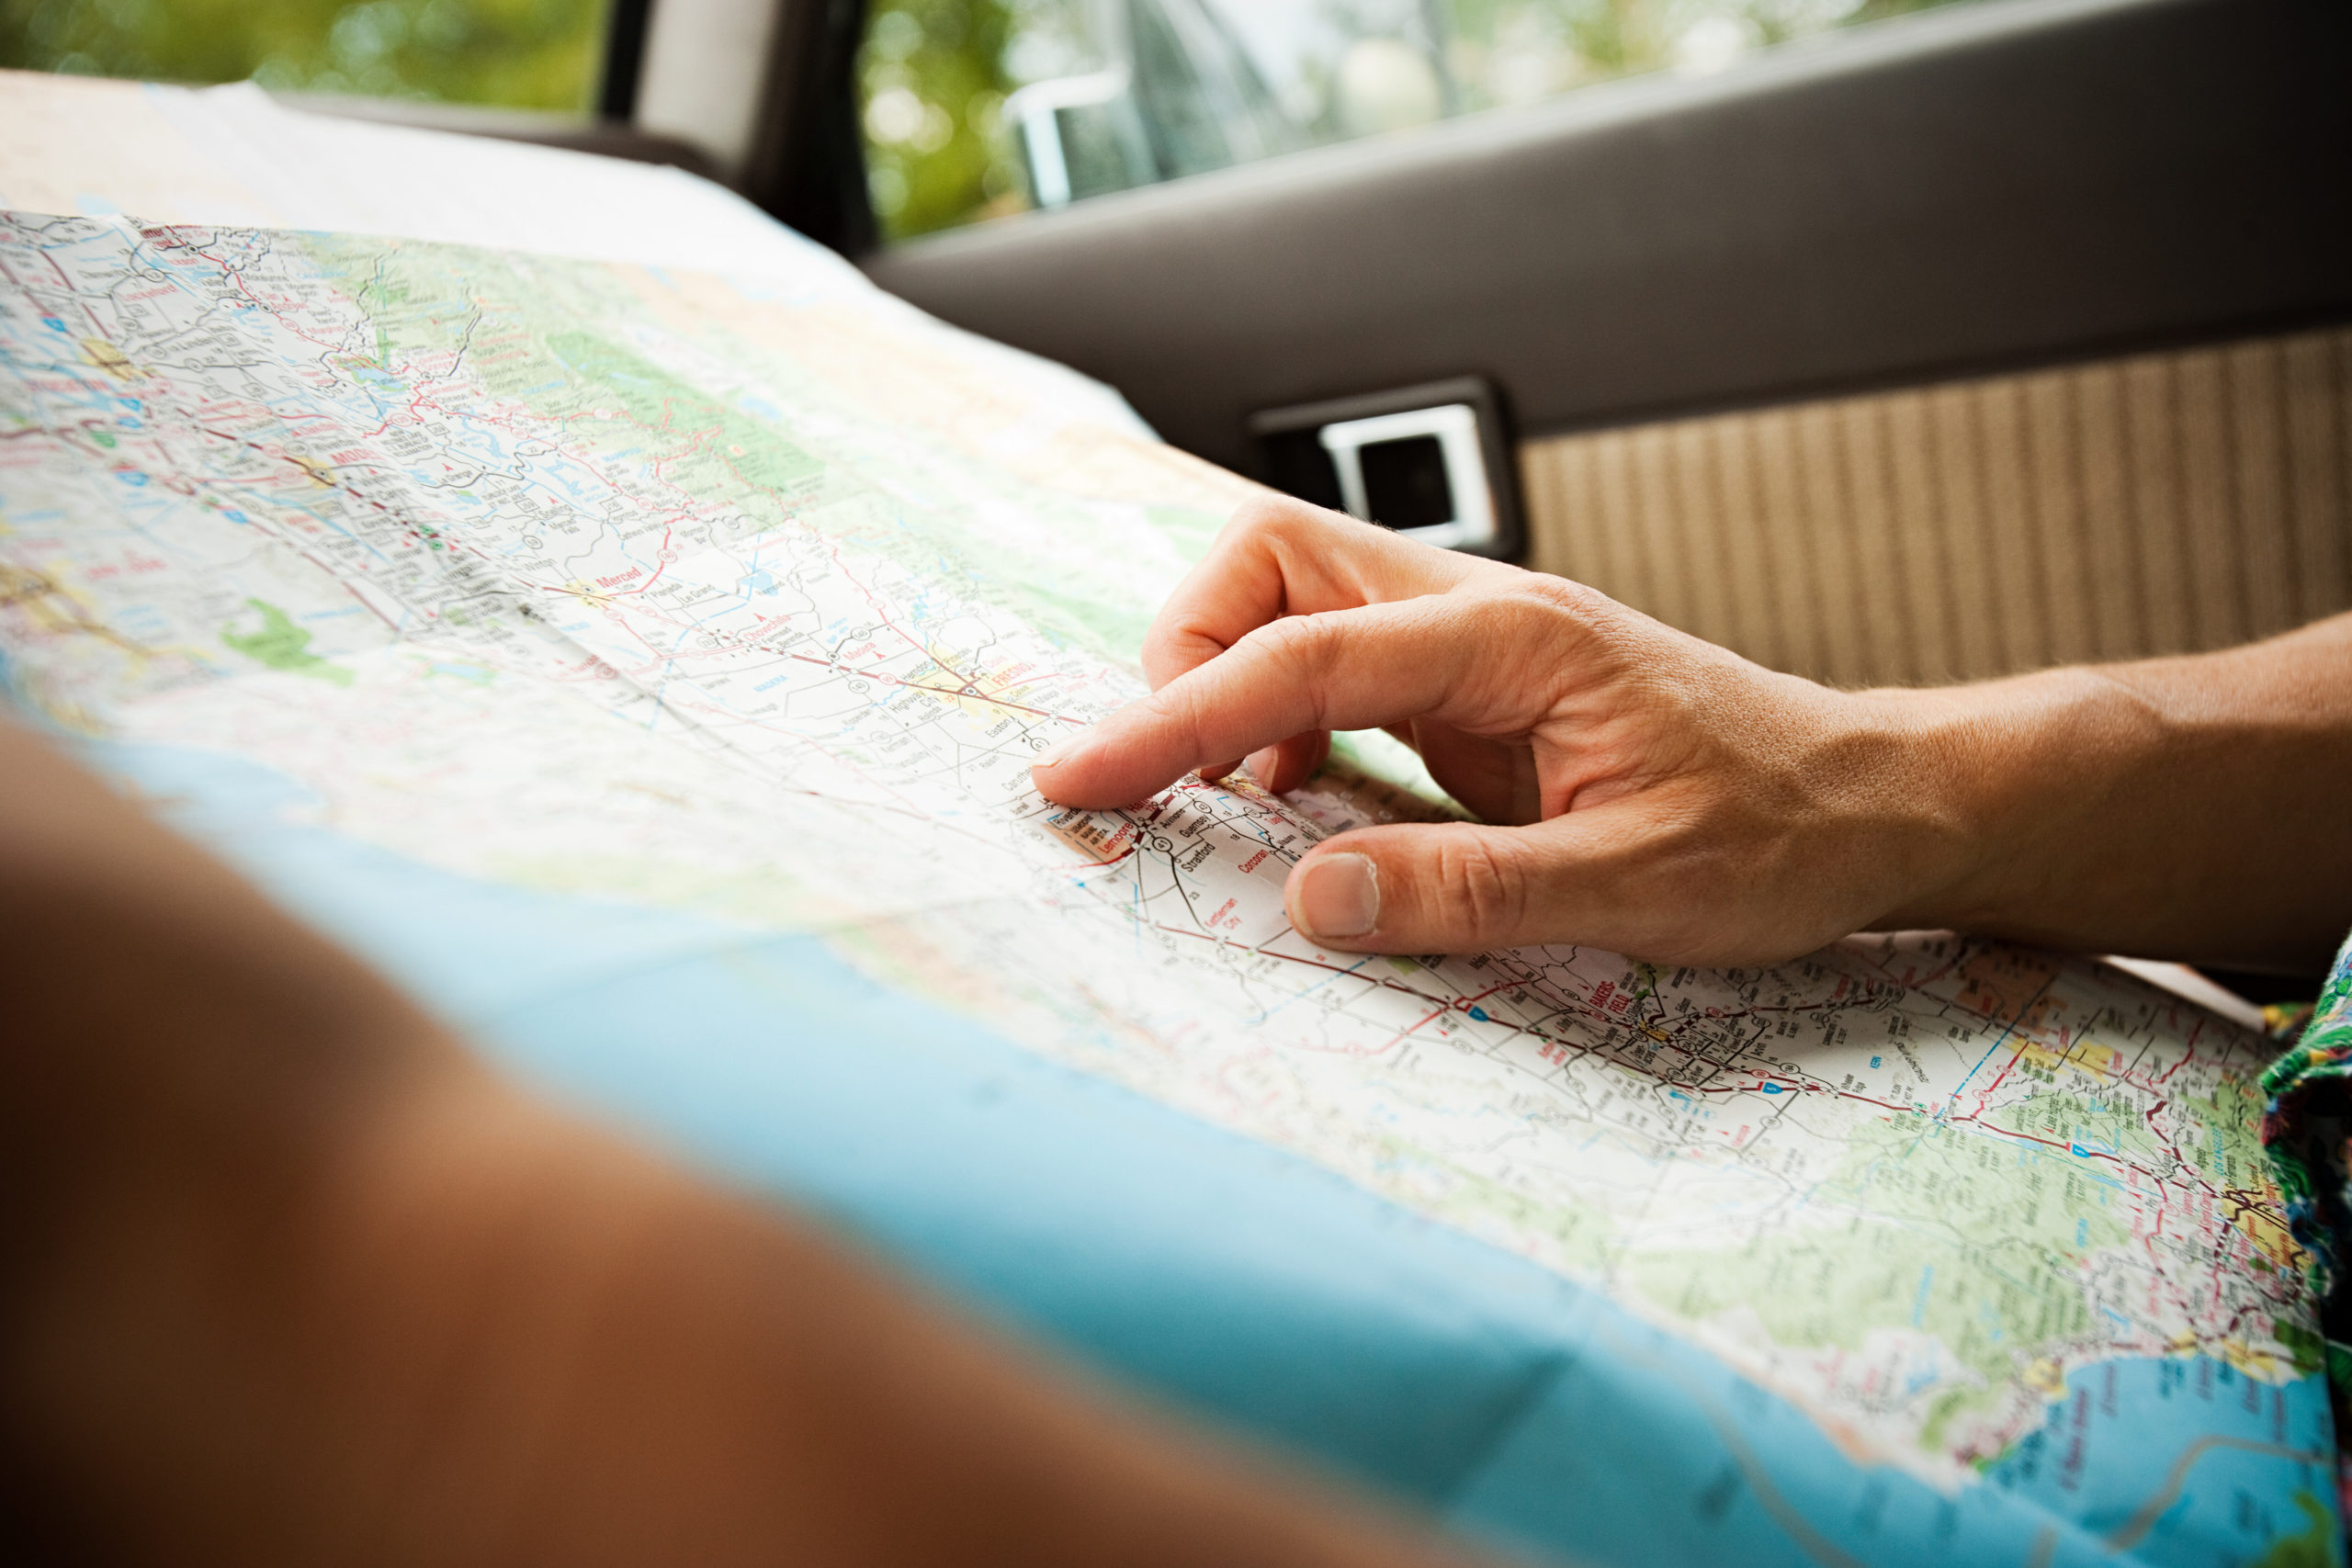 Stock image of person looking at a road map.